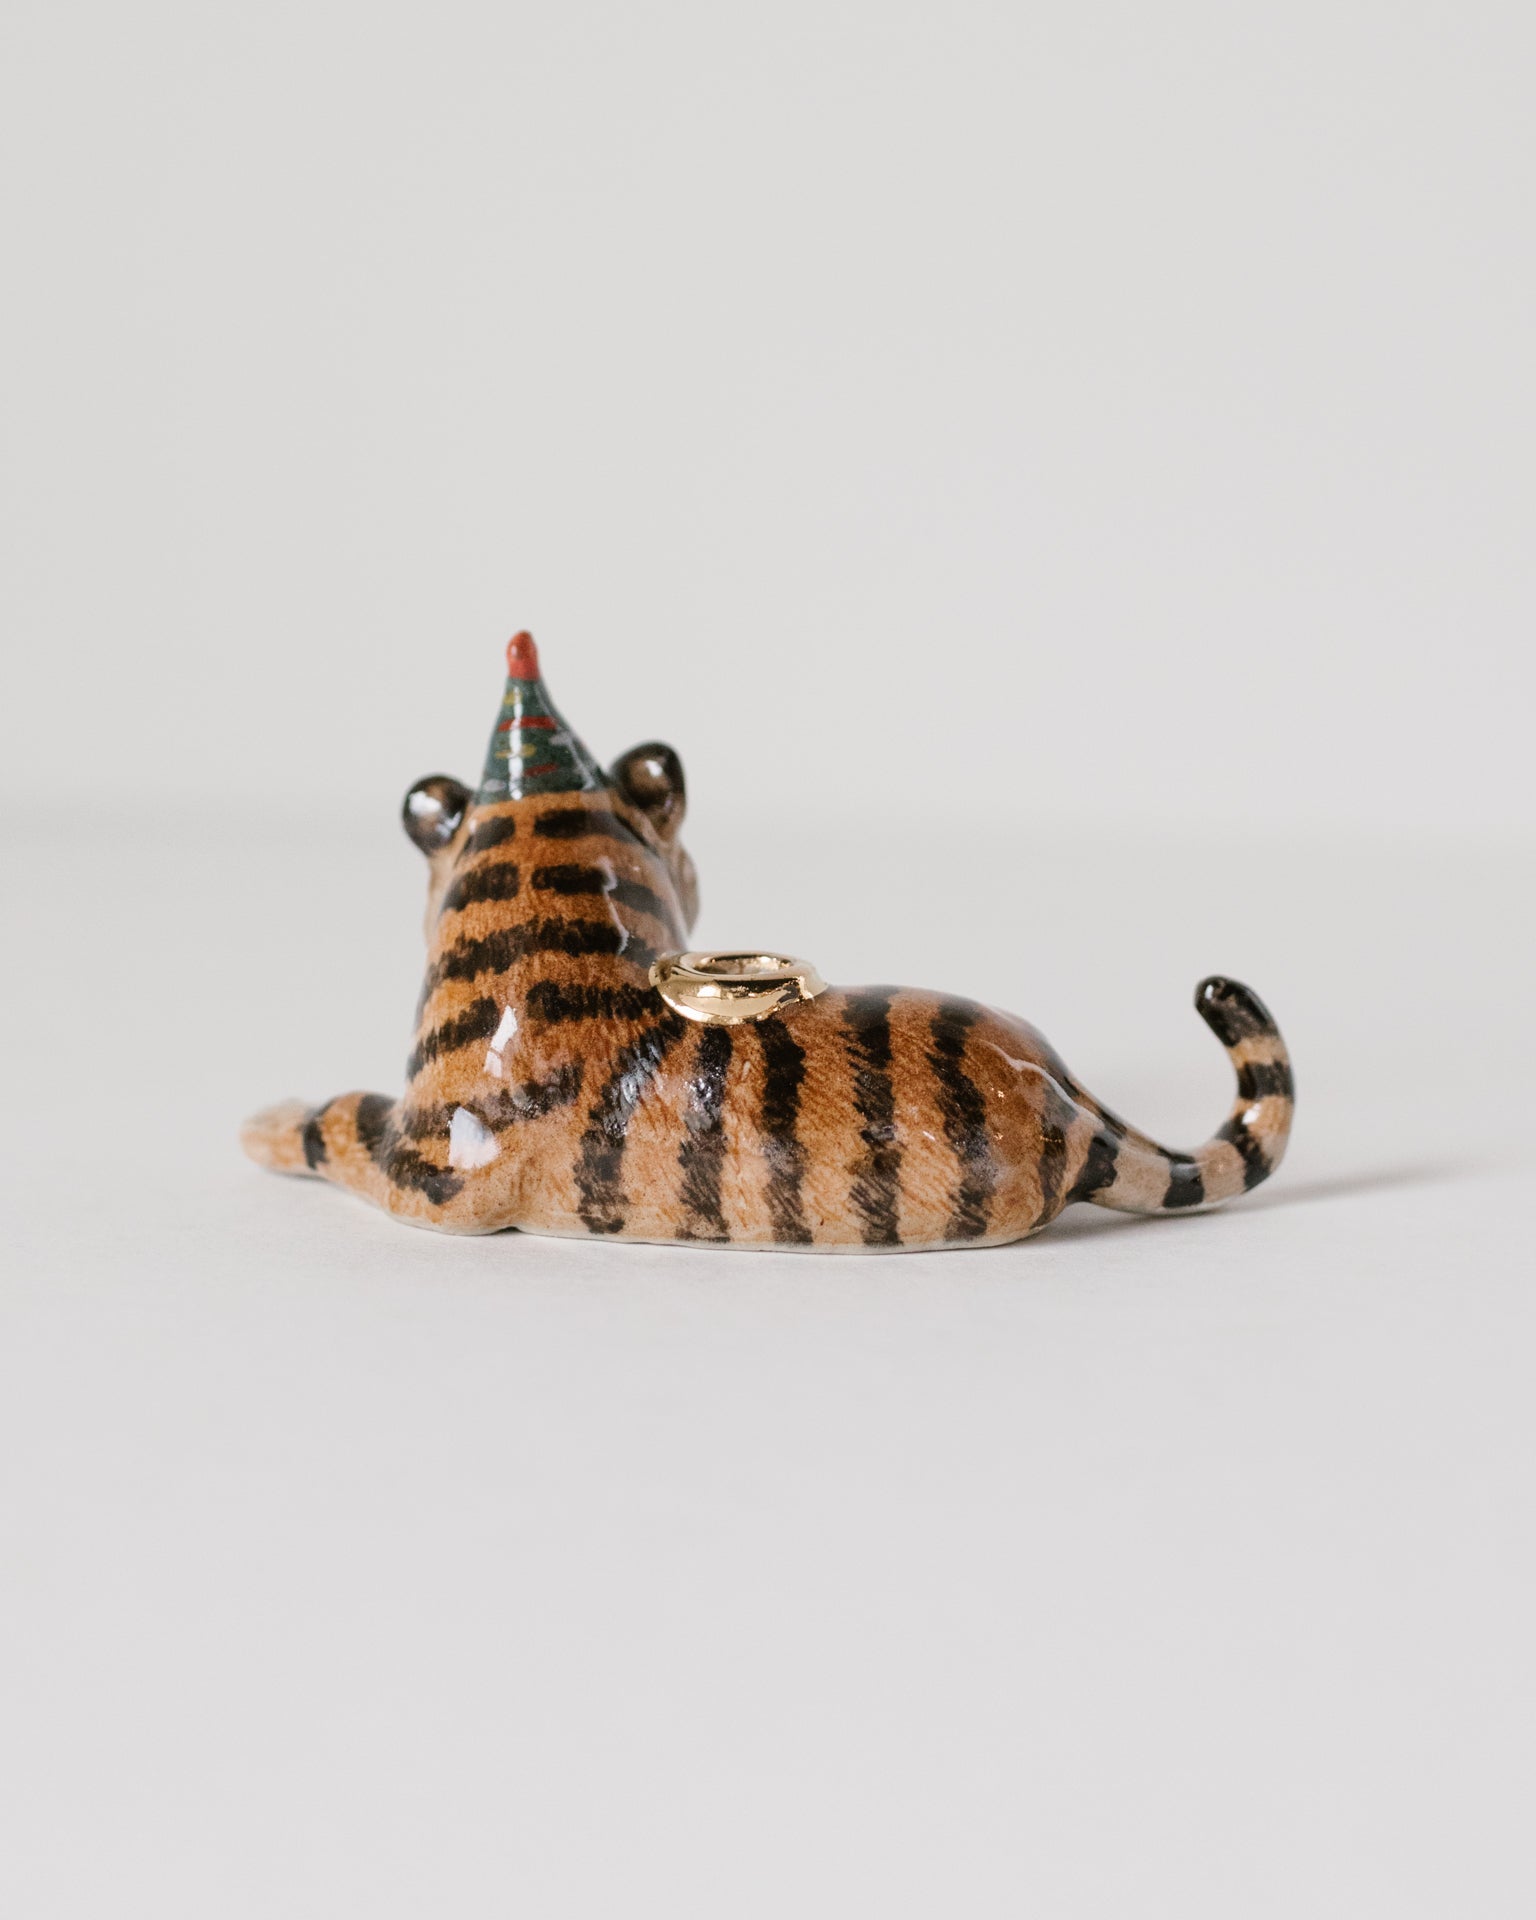 Little camp hollow paper + party year of the tiger cake topper in box